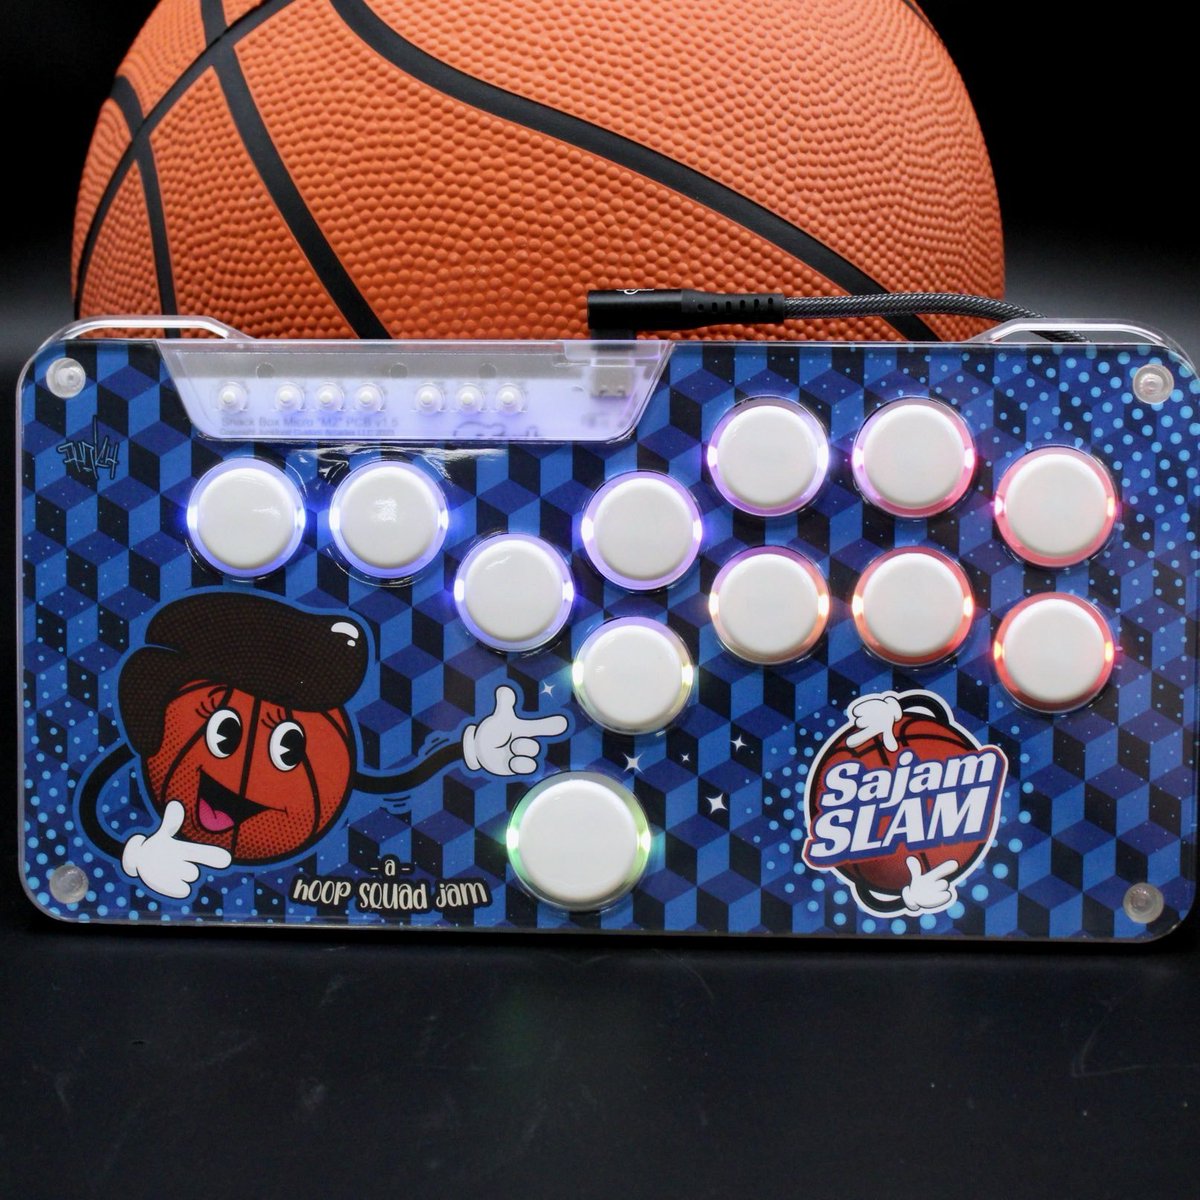 Also if you gamers haven't scooped one up yet, you can still get a #SajamSlam themed micro! Limited run available here: junkfoodarcades.com/products/sajam…